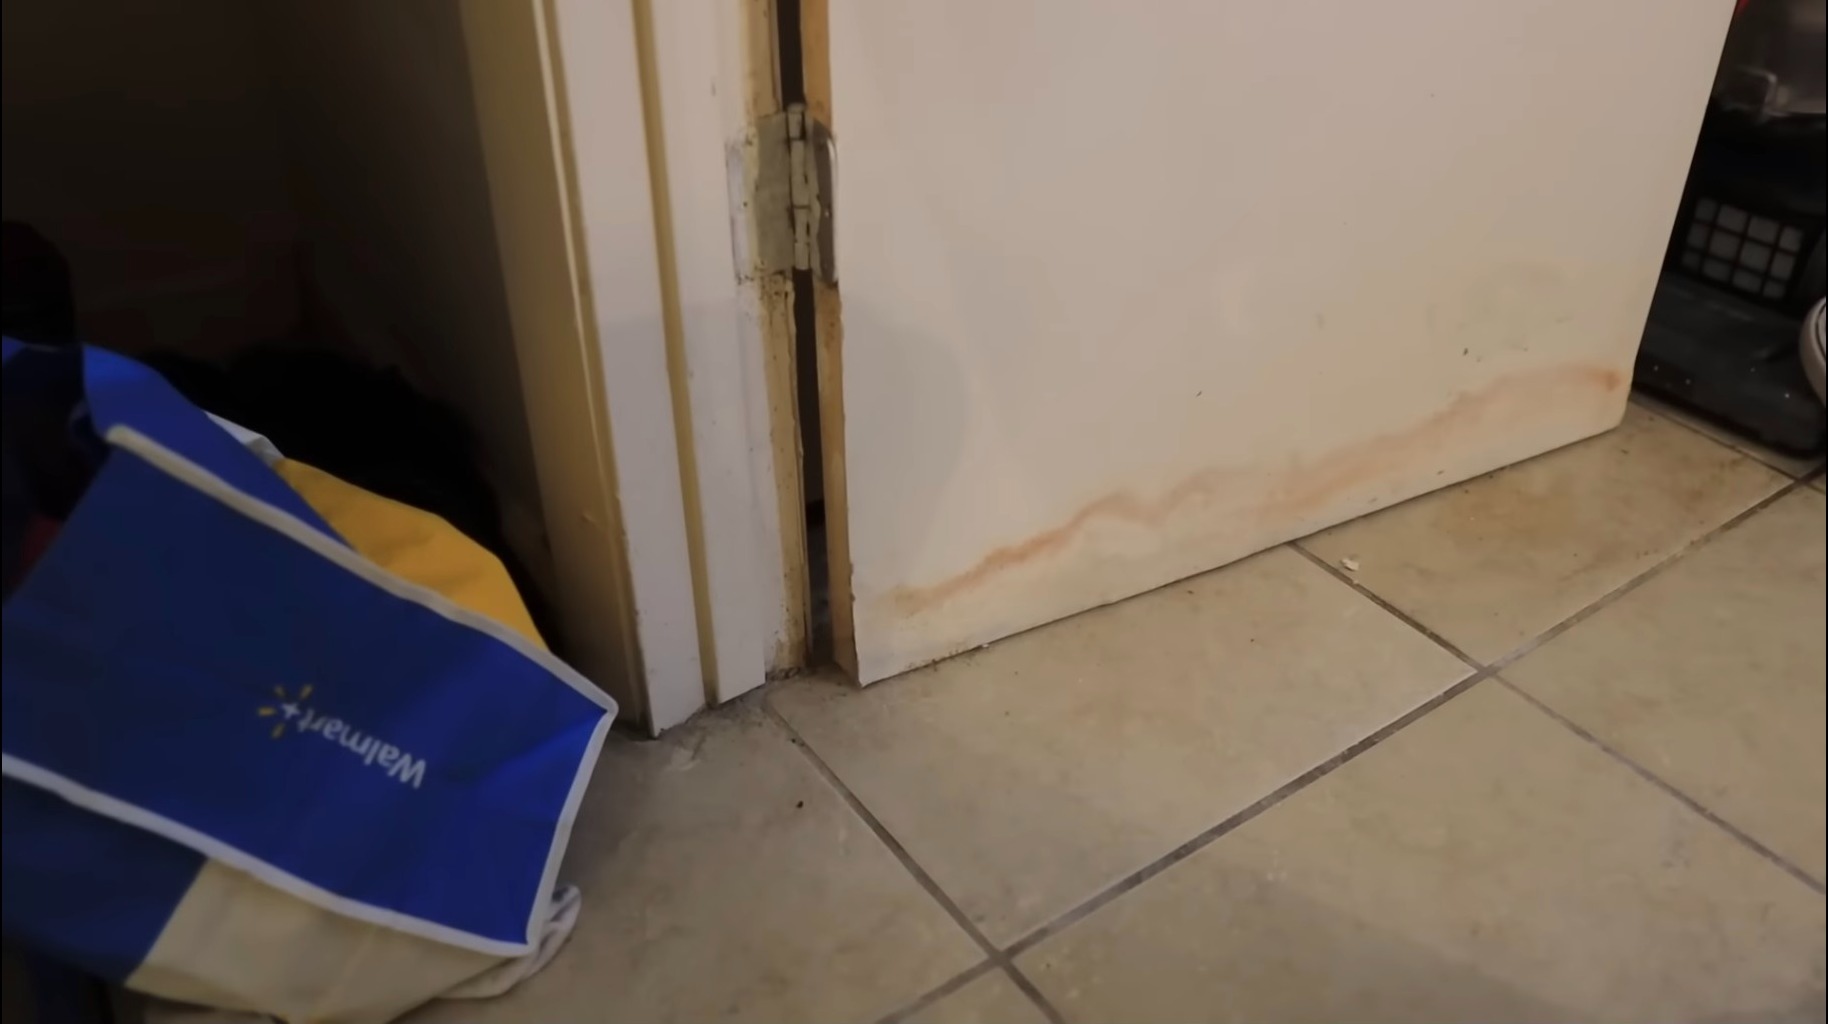 Sydney Willburn toured the apartment in Glendale, outside of Phoenix, where the tenant had a 4inch water line due to the regular sewage flooding